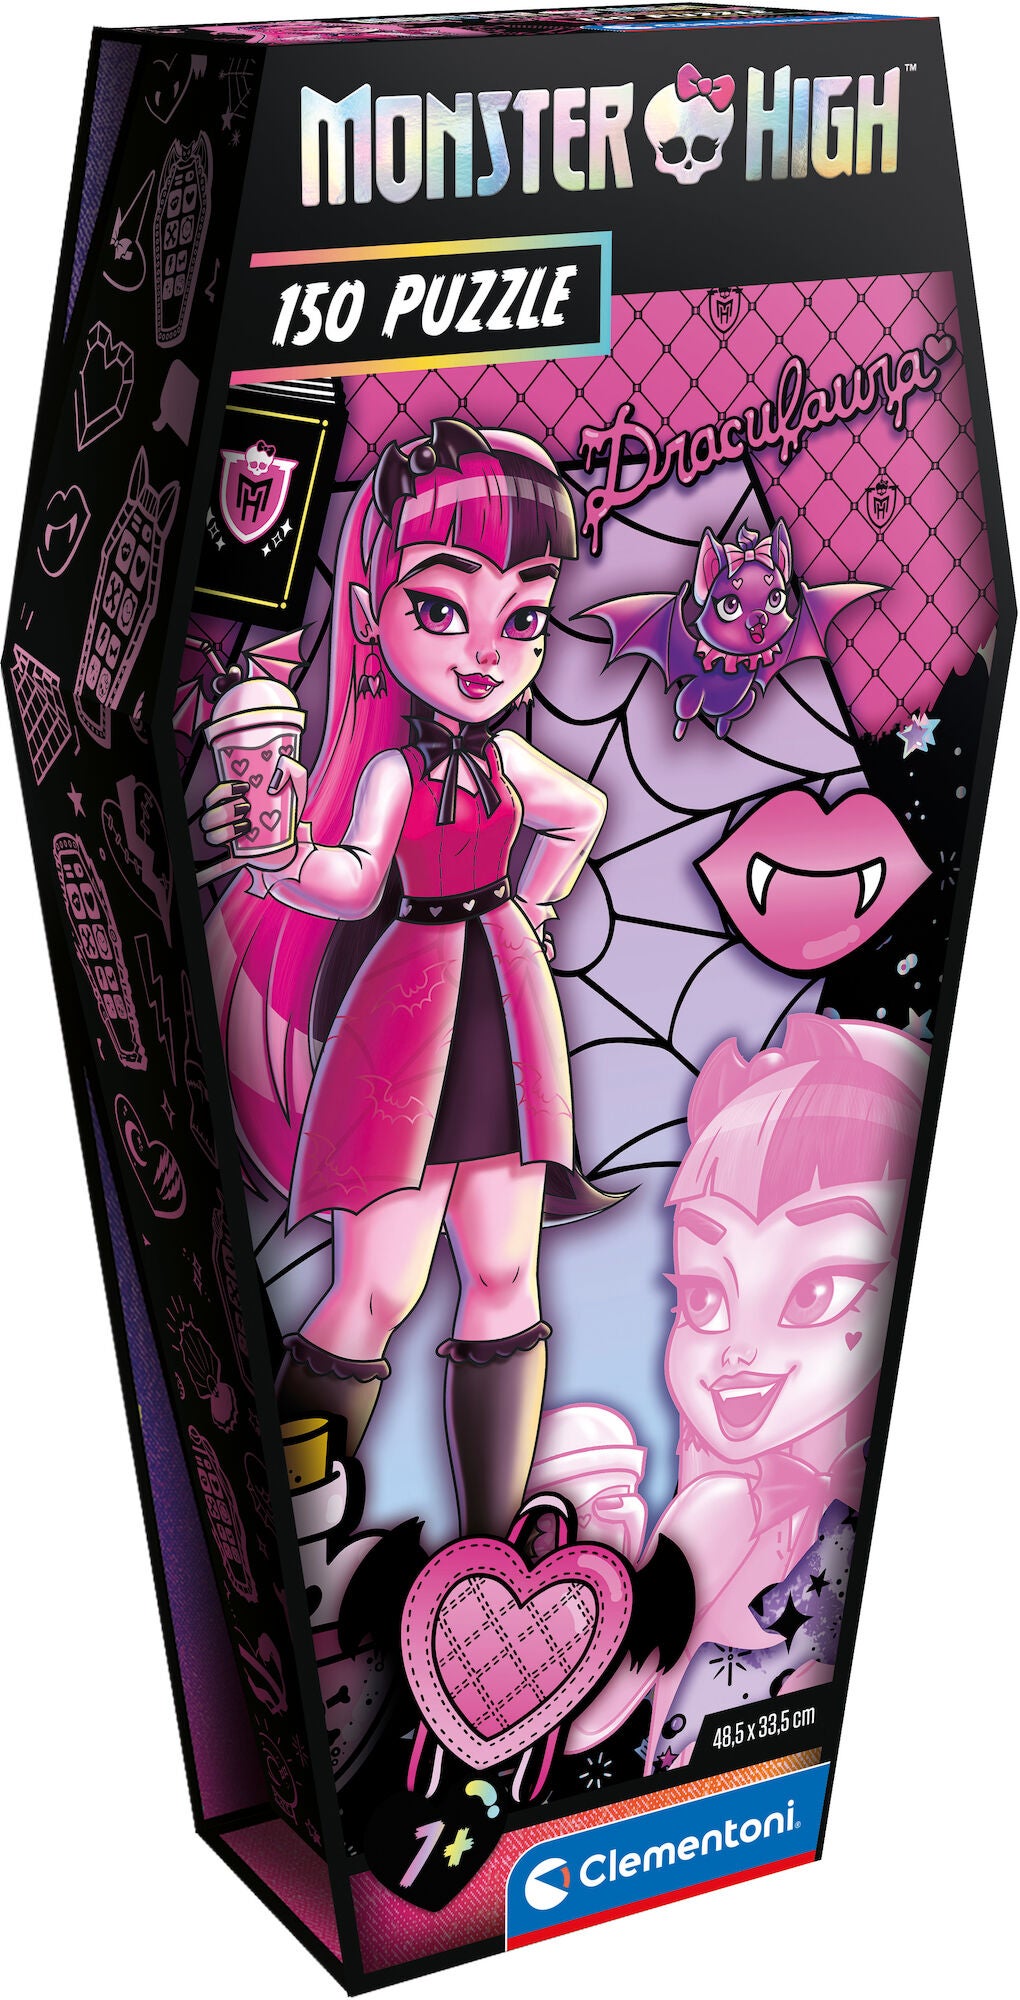 Clementoni Monster High Draculaura Puzzle 150 Teile von Monster High